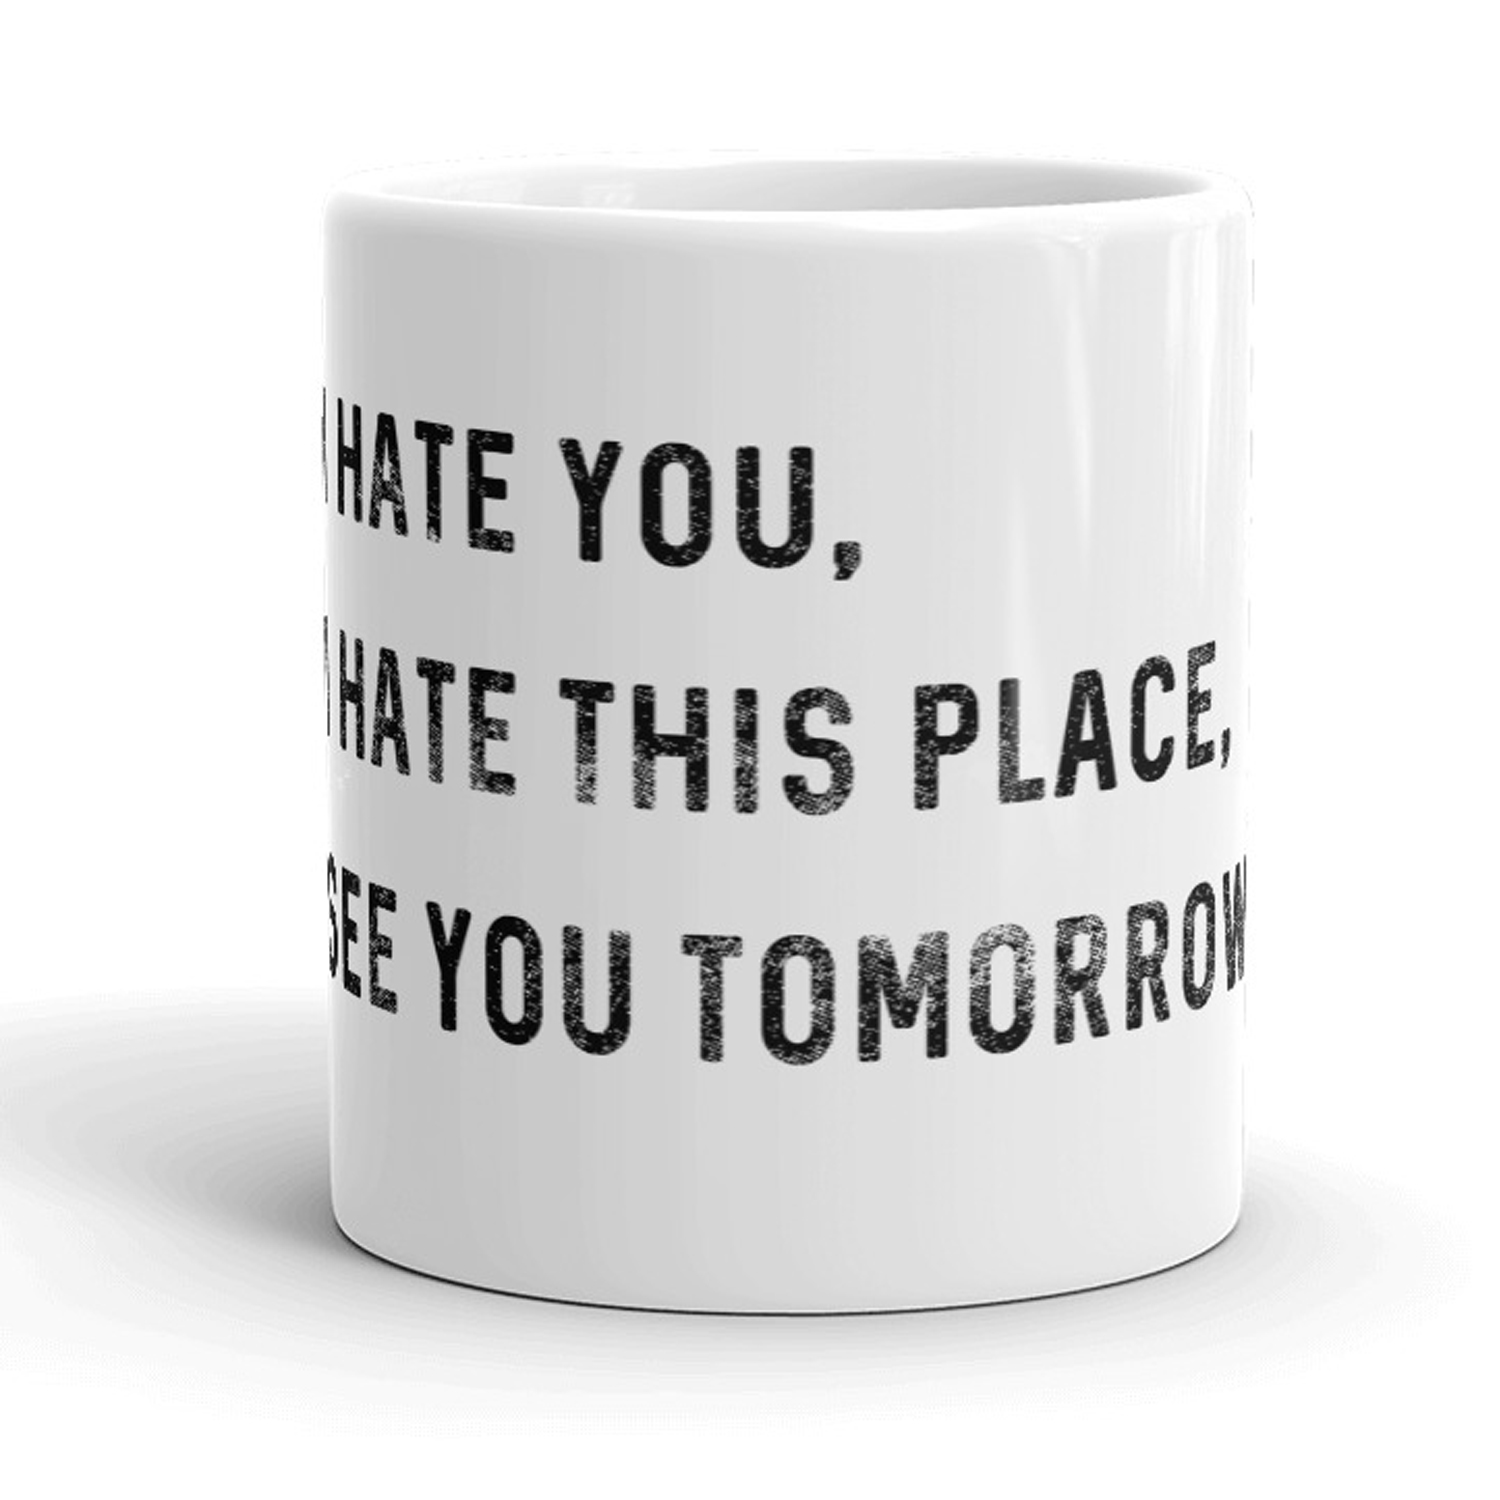 Crazy Dog Tshirts I Hate You I Hate This Place See You Tomorrow Mug Funny Office Coffee Cup - 11oz